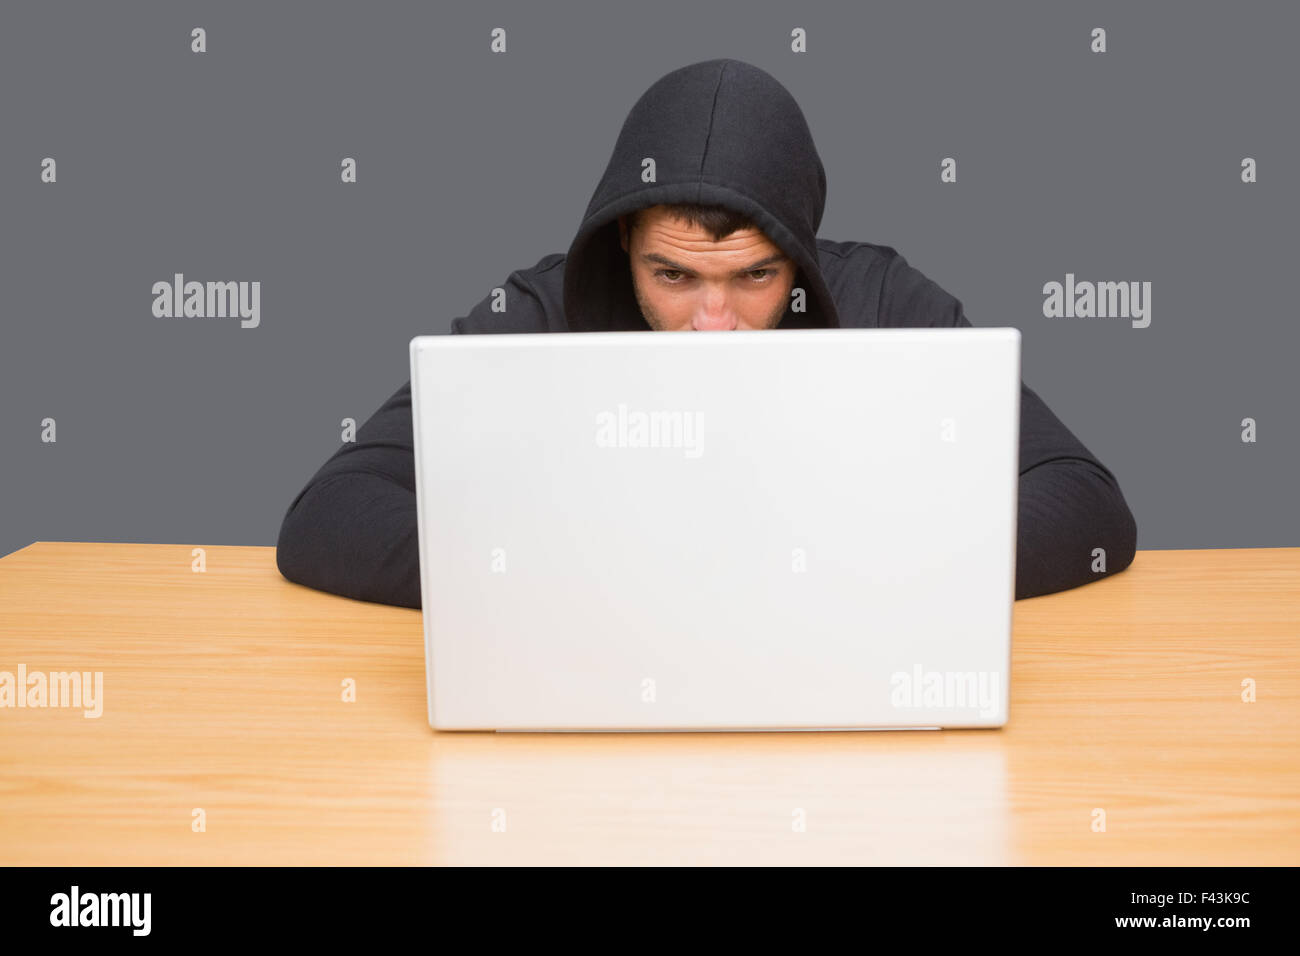 Hacker using laptop to steal identity Stock Photo